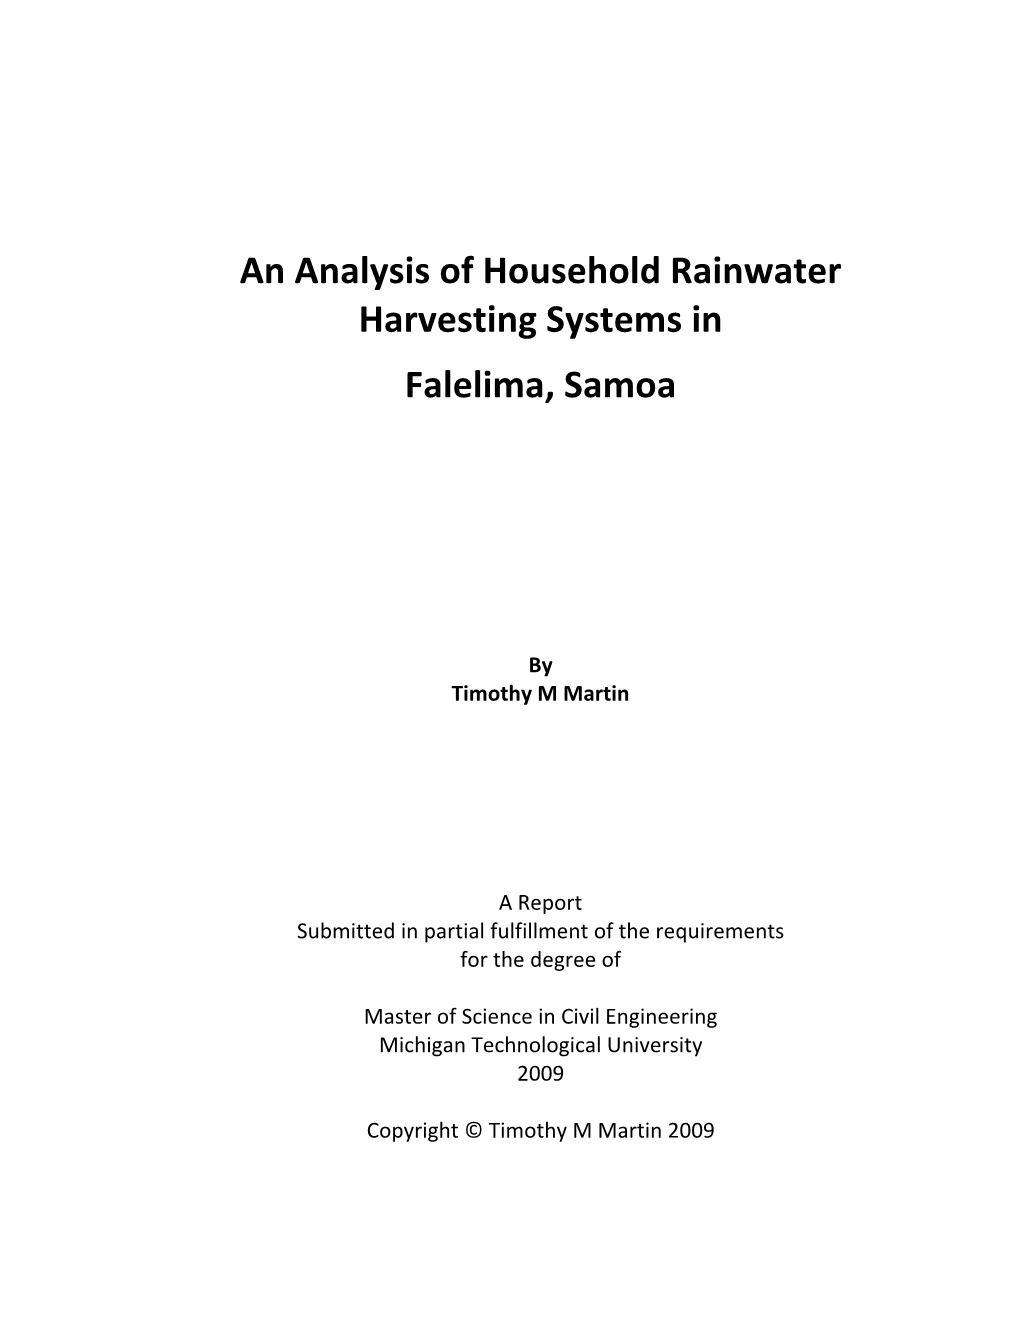 An Analysis of Household Rainwater Harvesting Systems in Falelima, Samoa